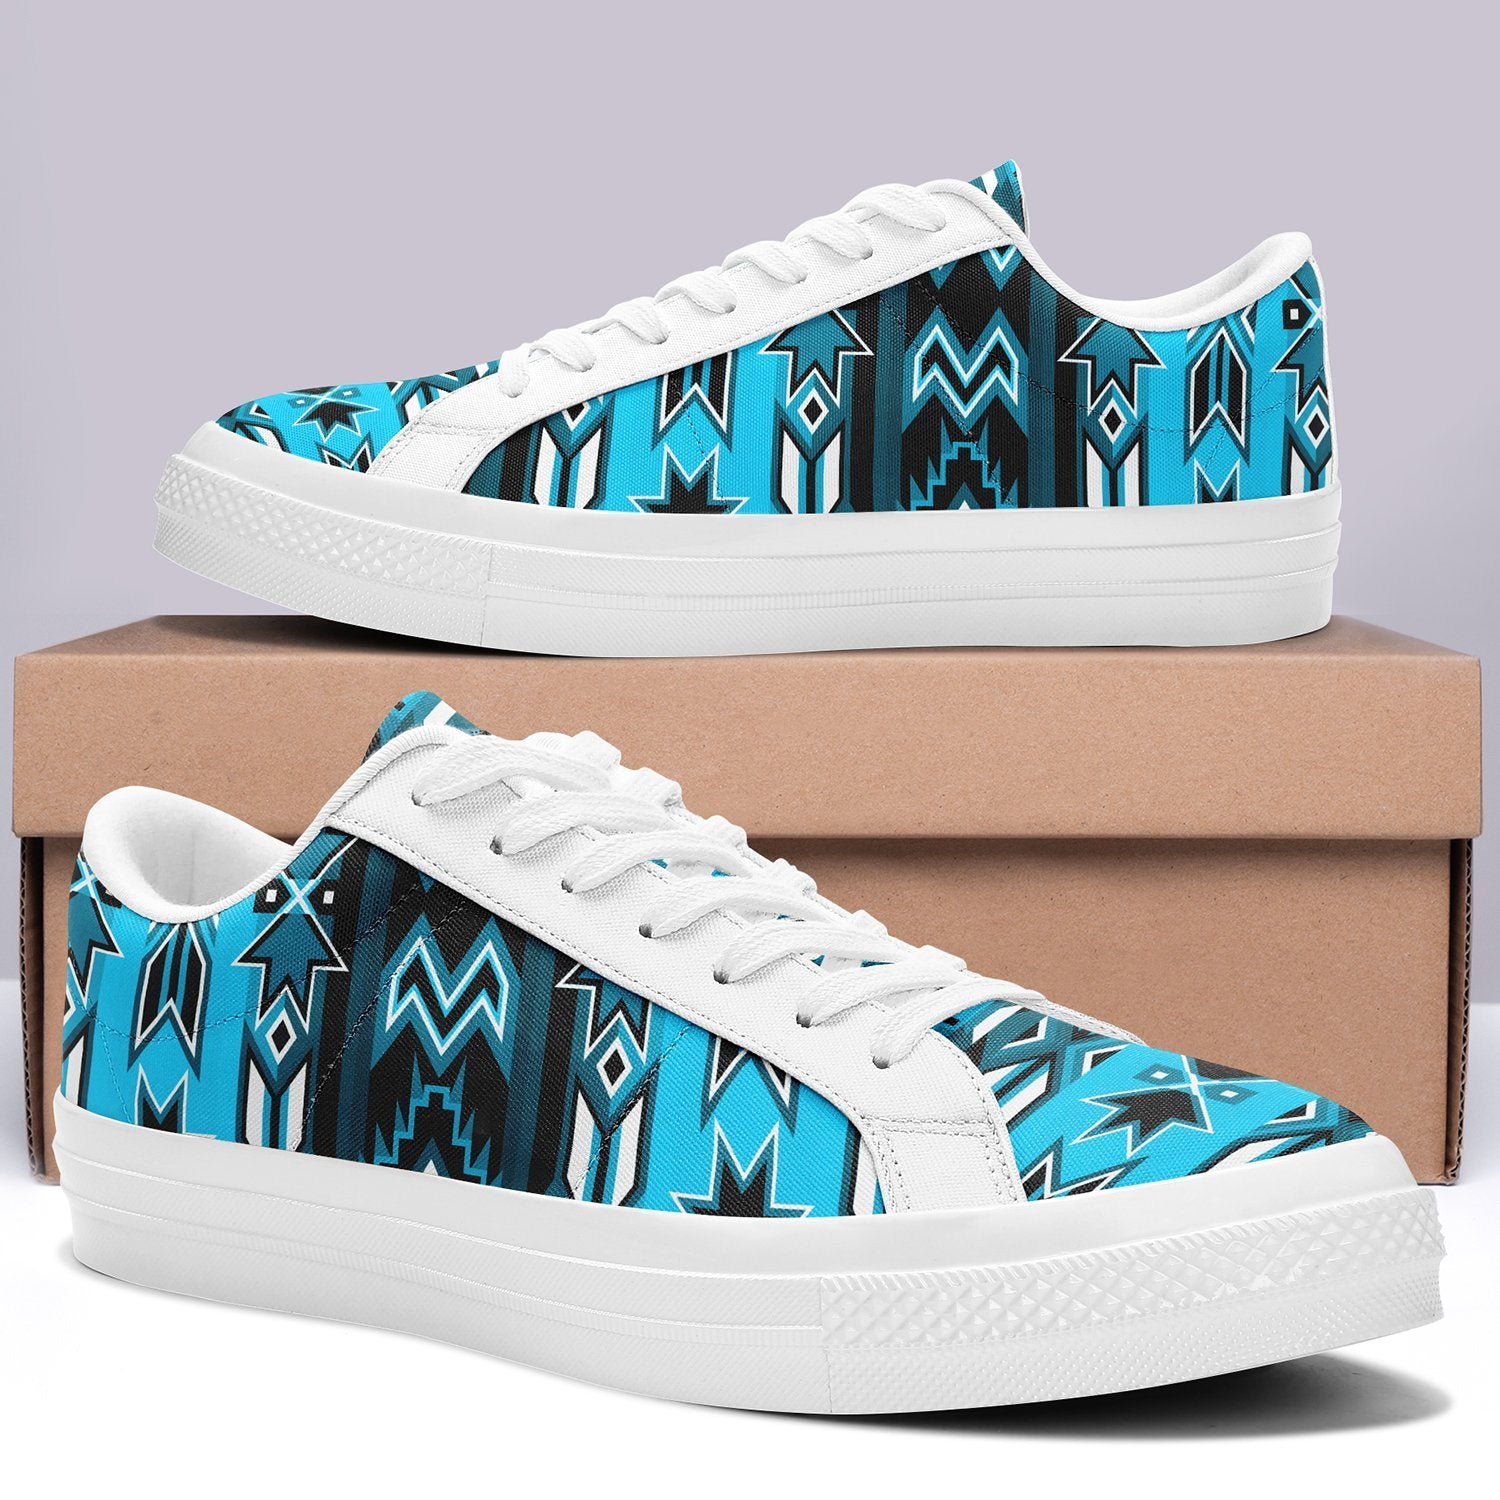 Northern Journey Aapisi Low Top Canvas Shoes White Sole 49 Dzine 